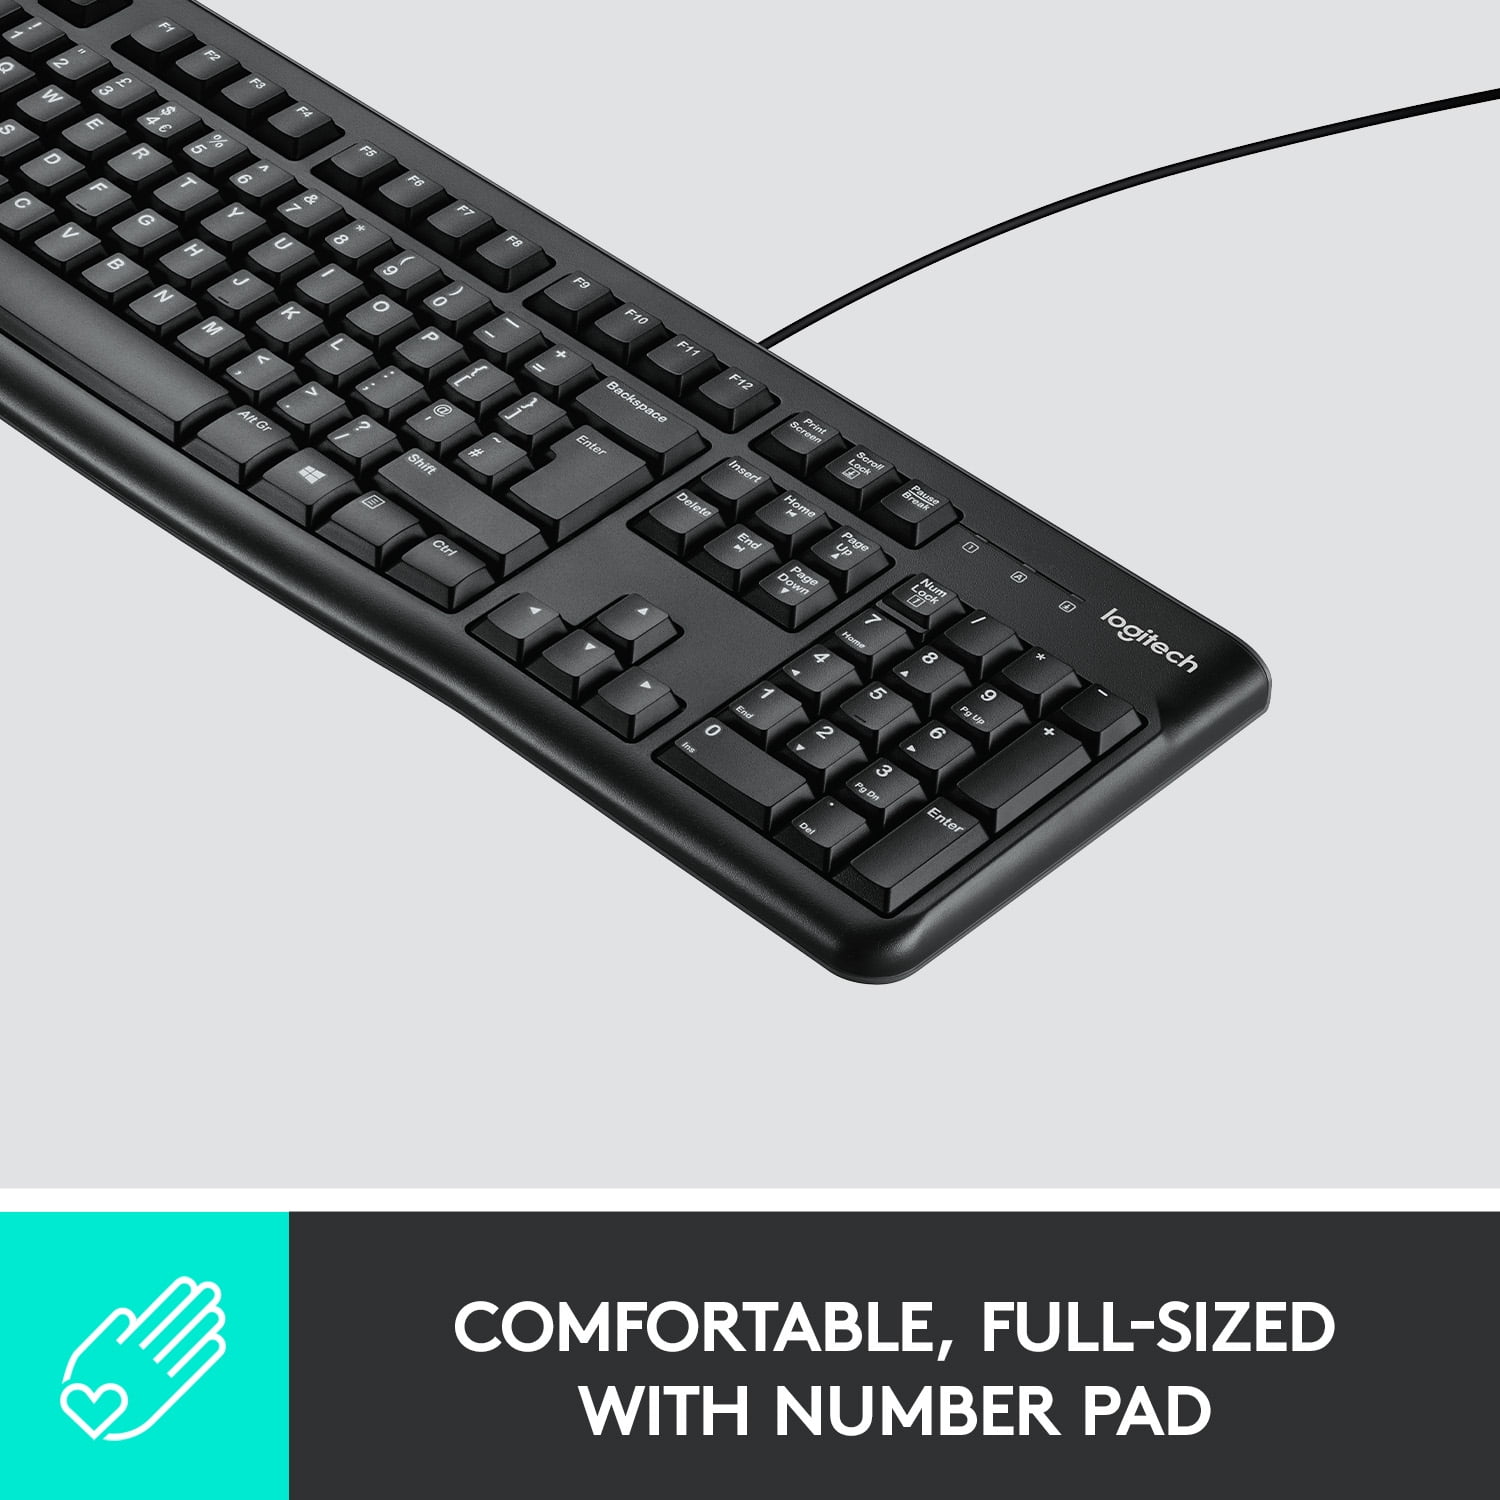 Logitech K120 Keyboard for Windows, USB Plug-and-Play, Full-Size, Curved Space Bar, Compatible with PC, Black - Walmart.com